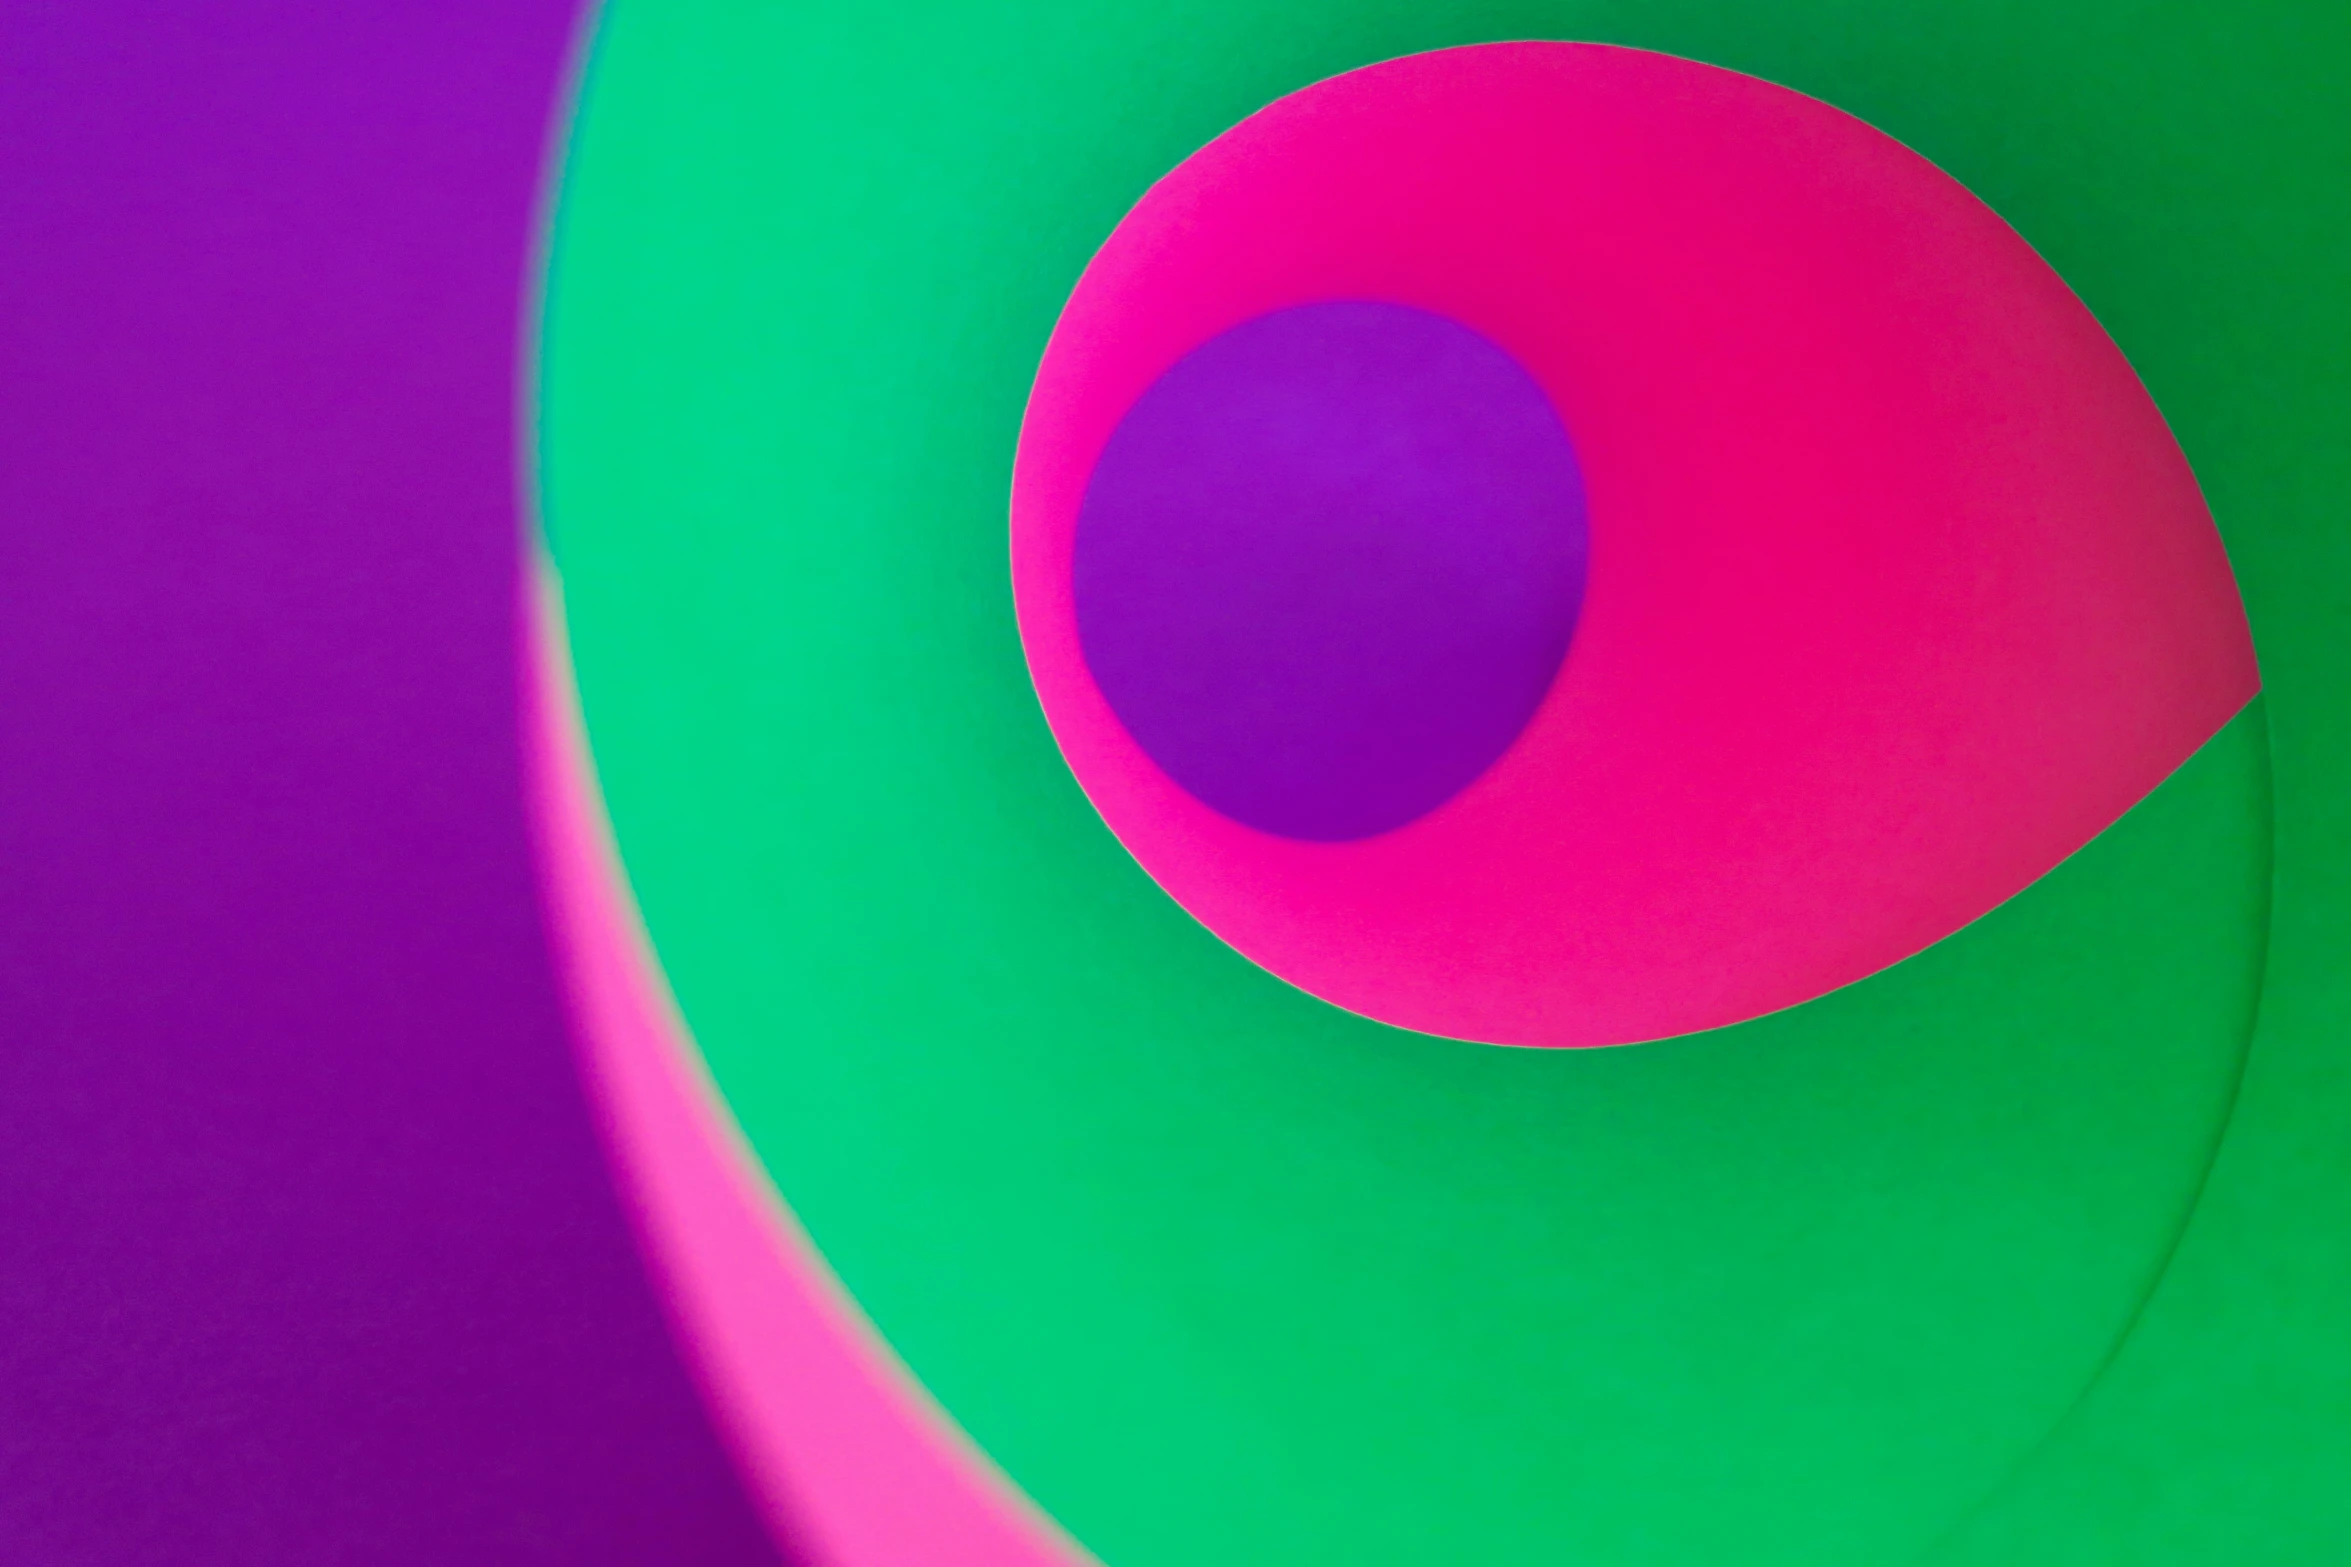 a colorful circular object is shown in purple, green and pink